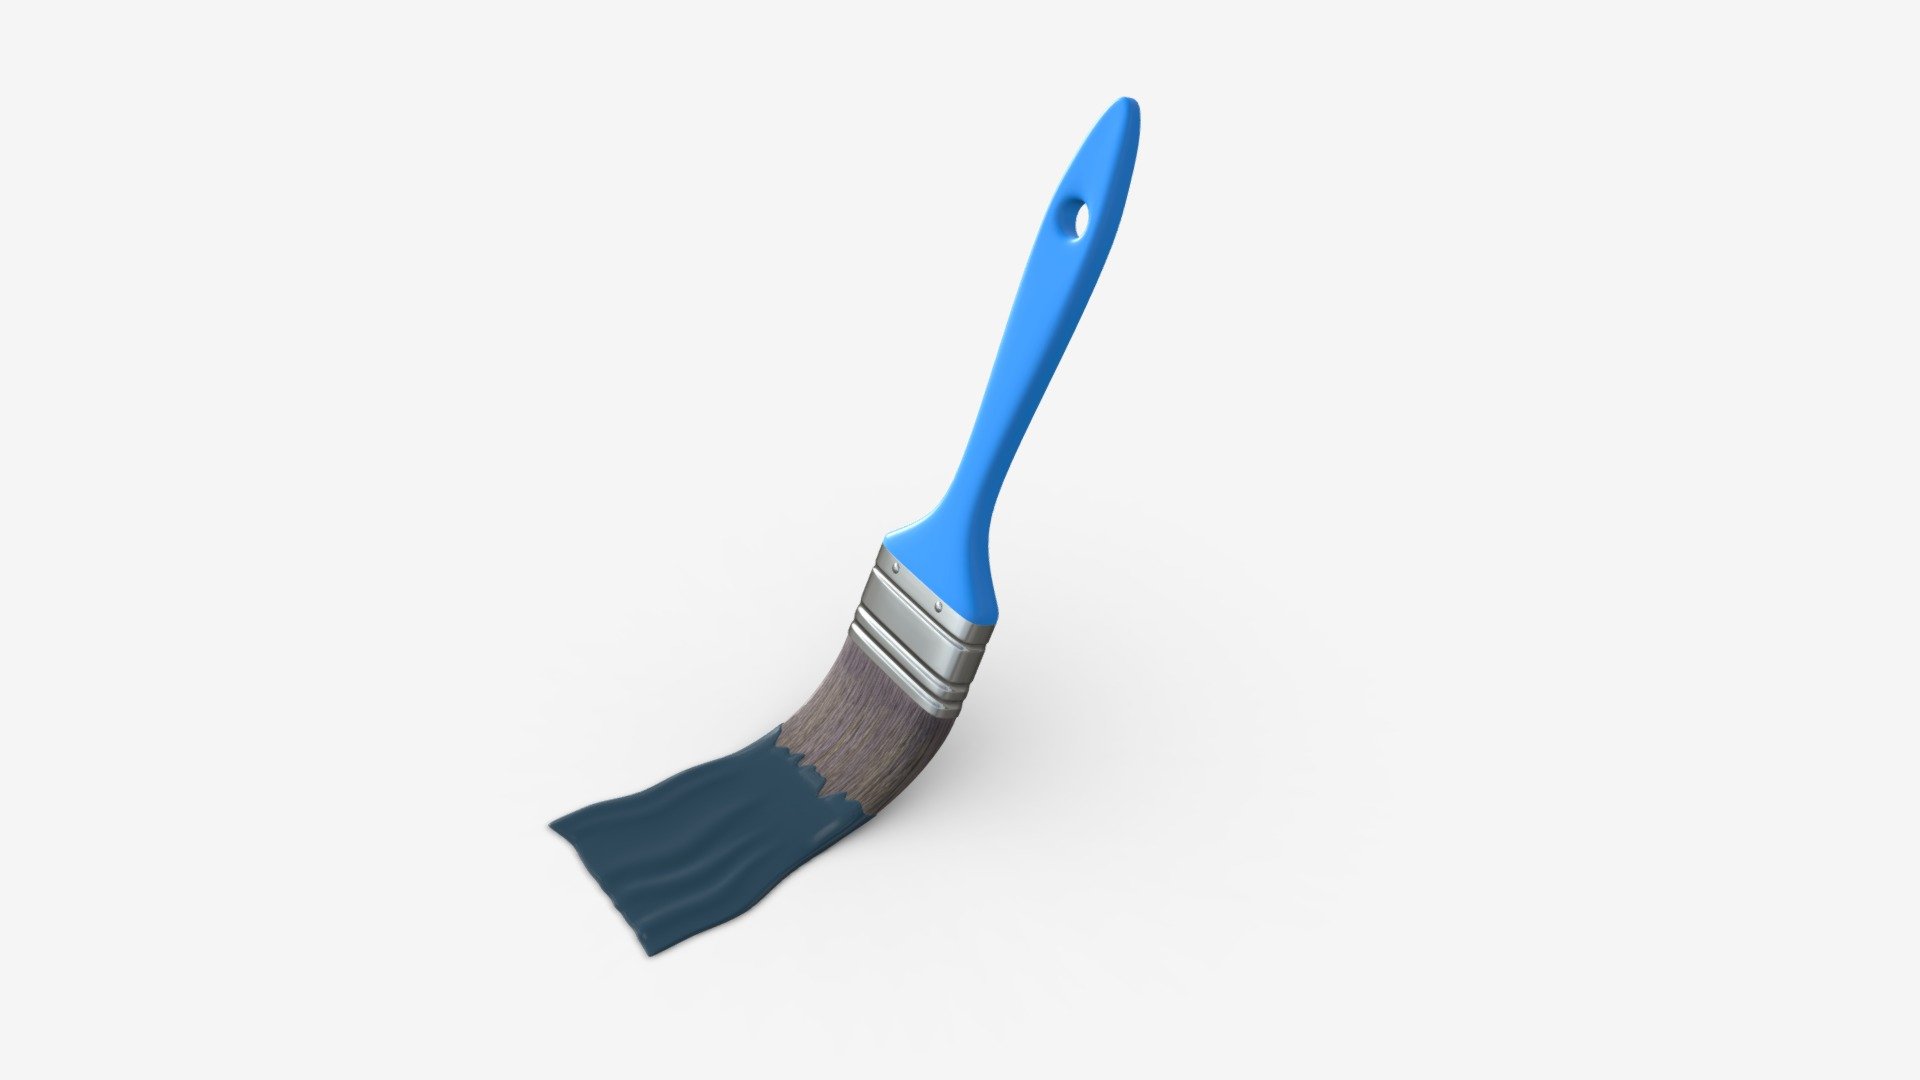 64,778 Small Paint Brush Images, Stock Photos, 3D objects, & Vectors